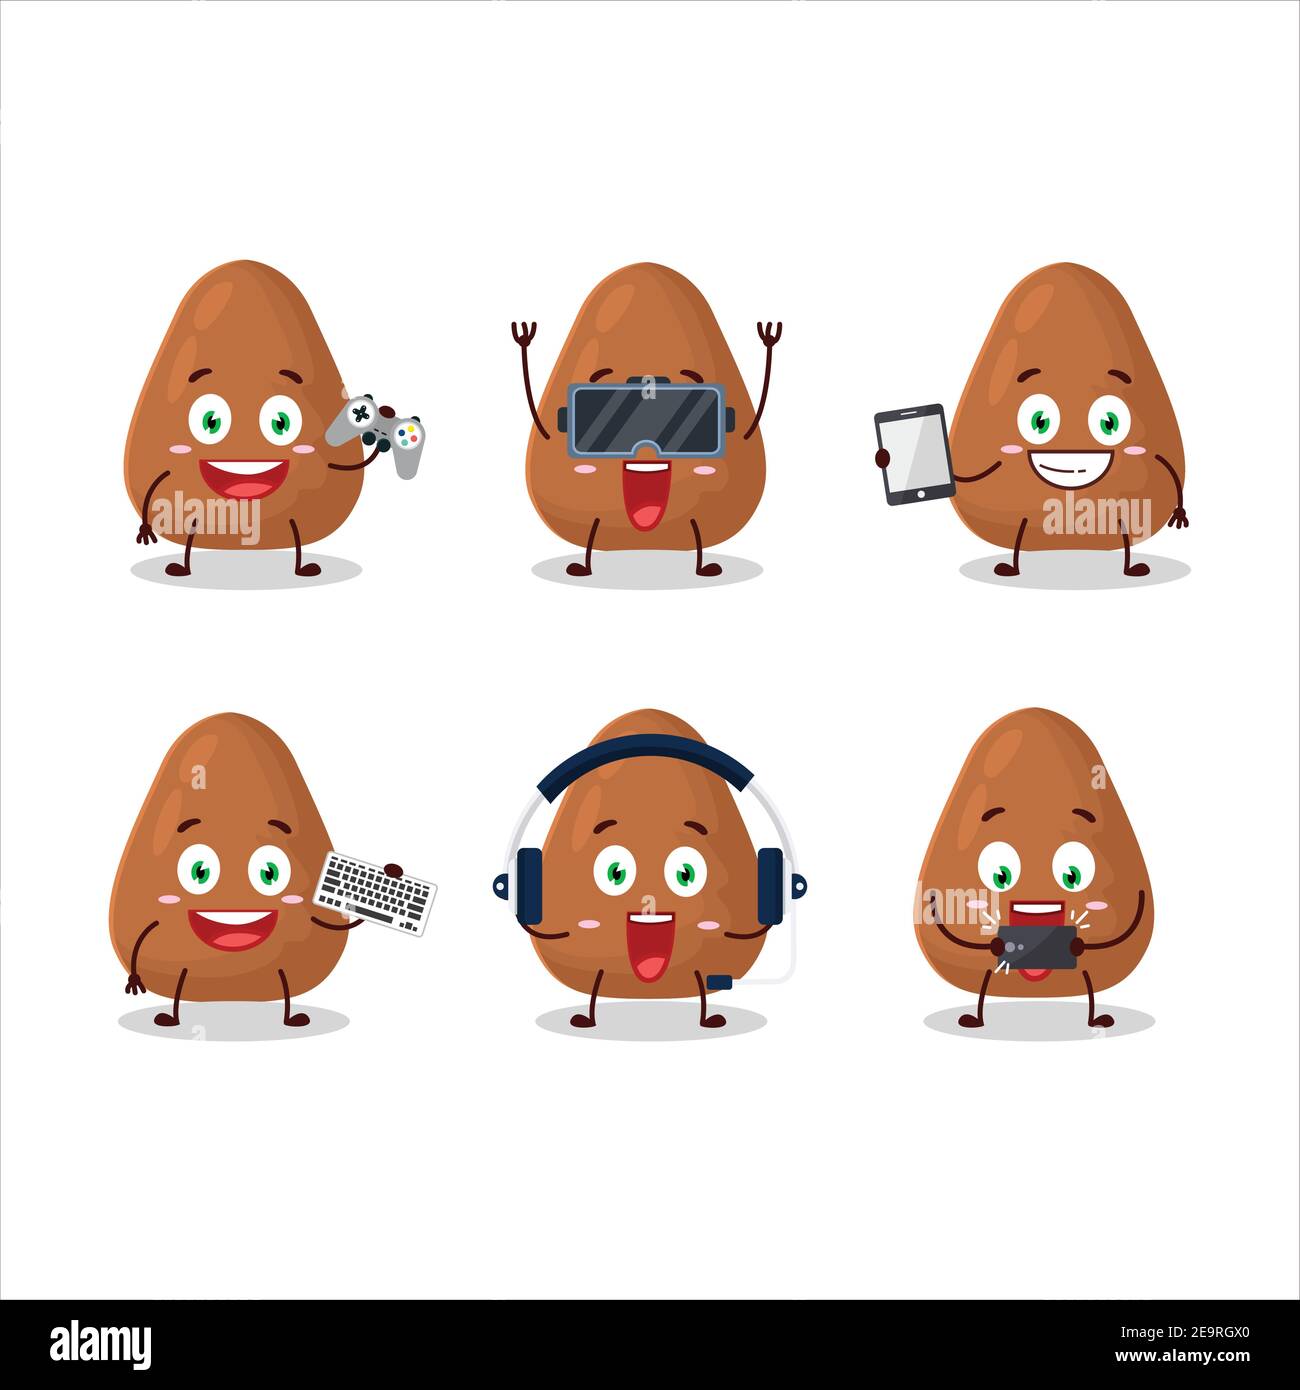 Mamey cartoon character are playing games with various cute emoticons. Vector illustration Stock Vector